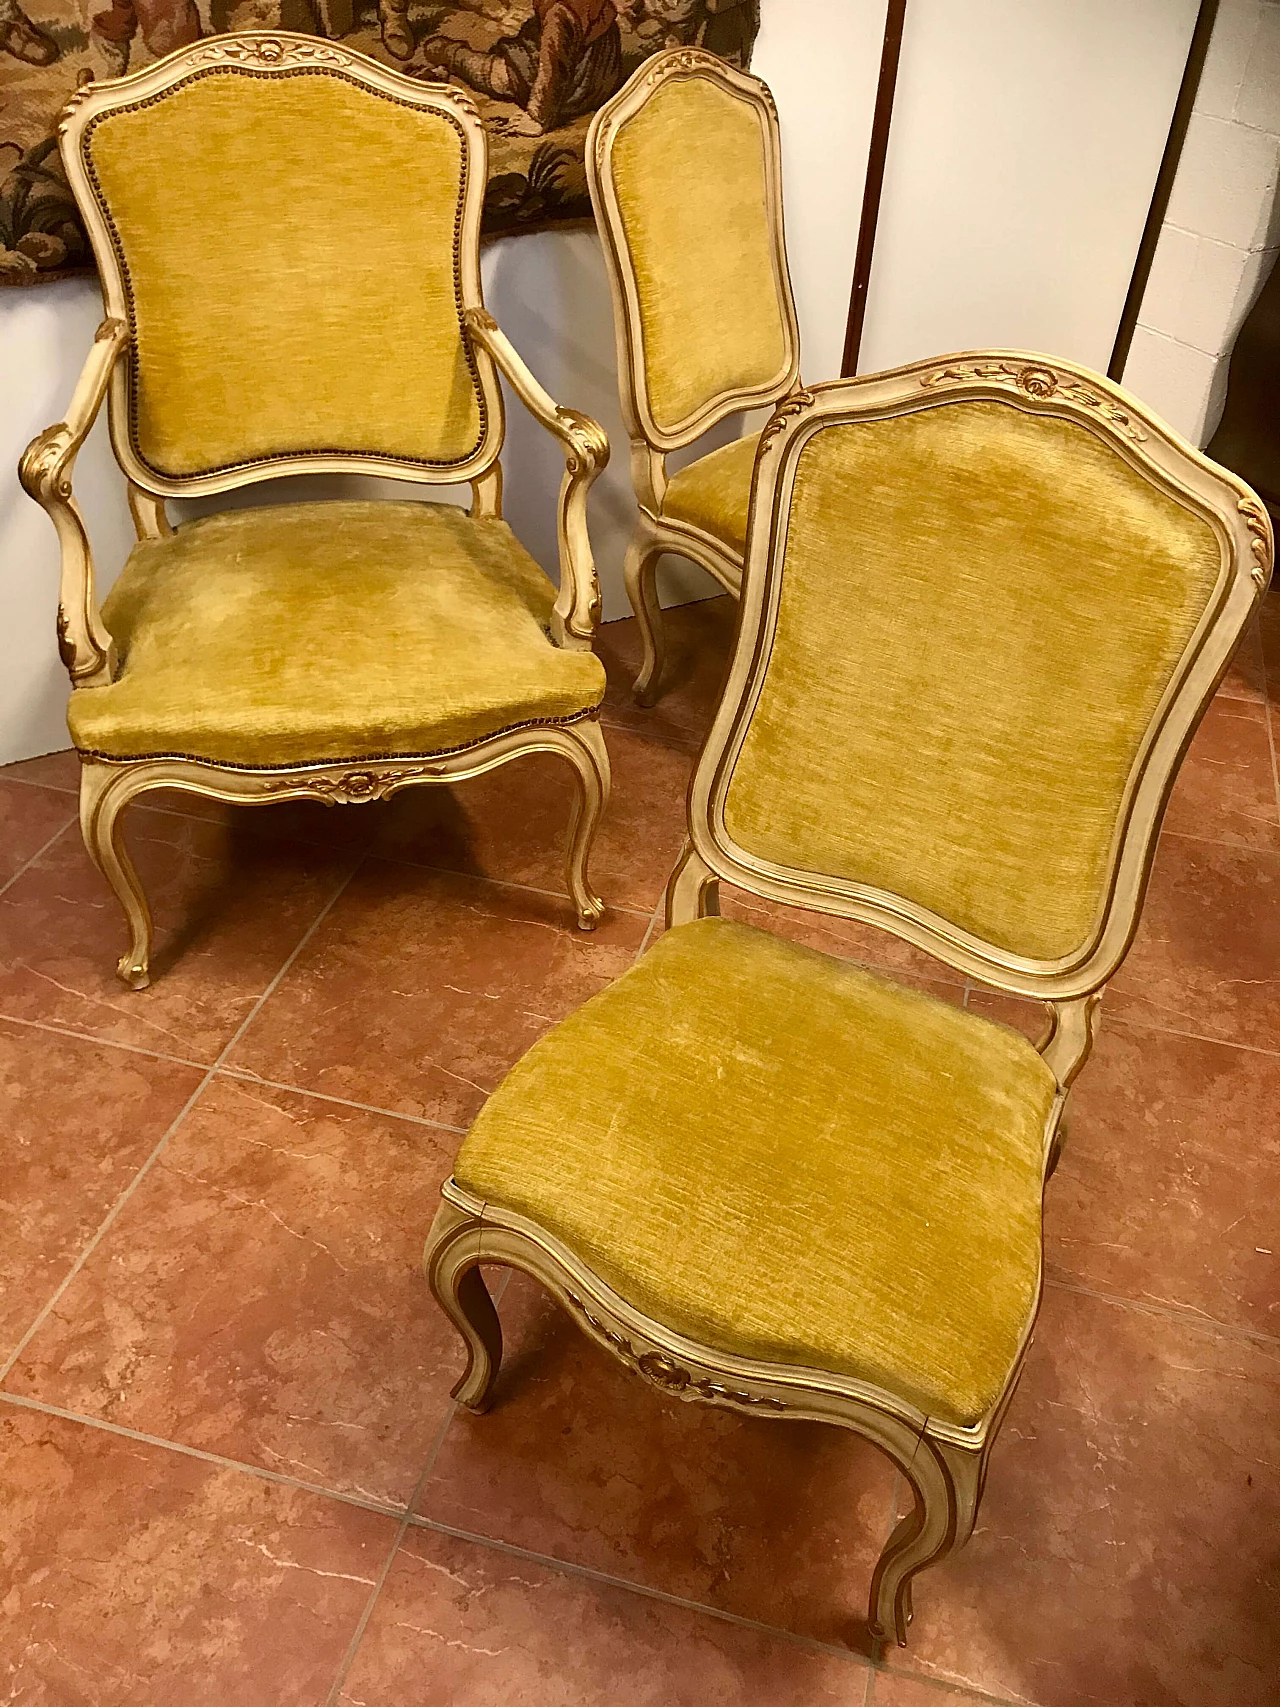 Set of 1 armchair and 2 lacquered and gilded chairs lined with gold-colored velvet, original mid 20th century 1222438